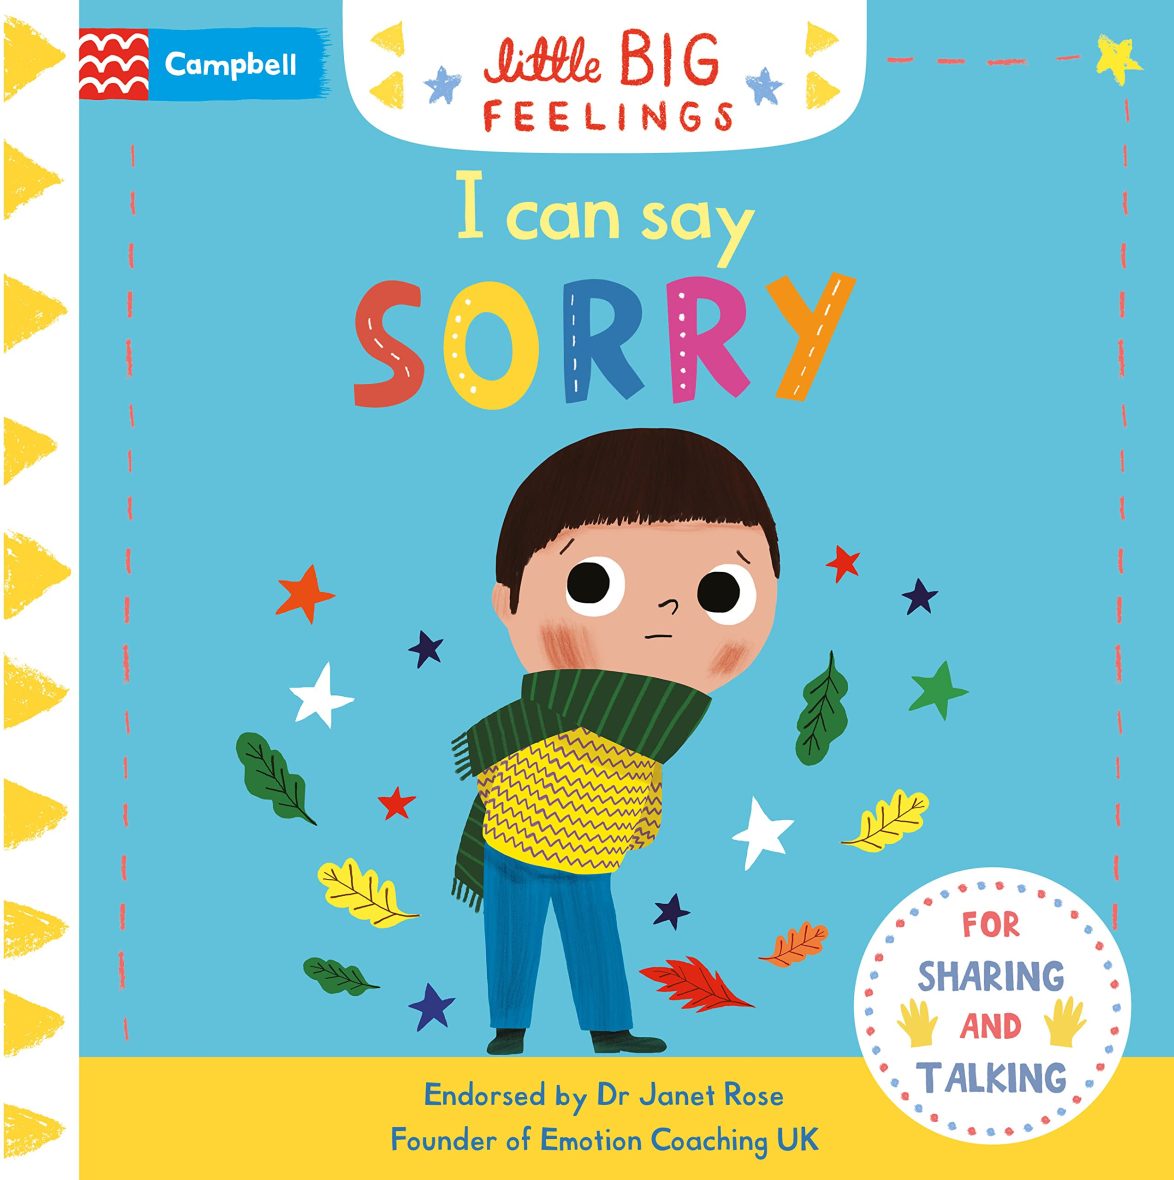 I can say Sorry – book about emotions